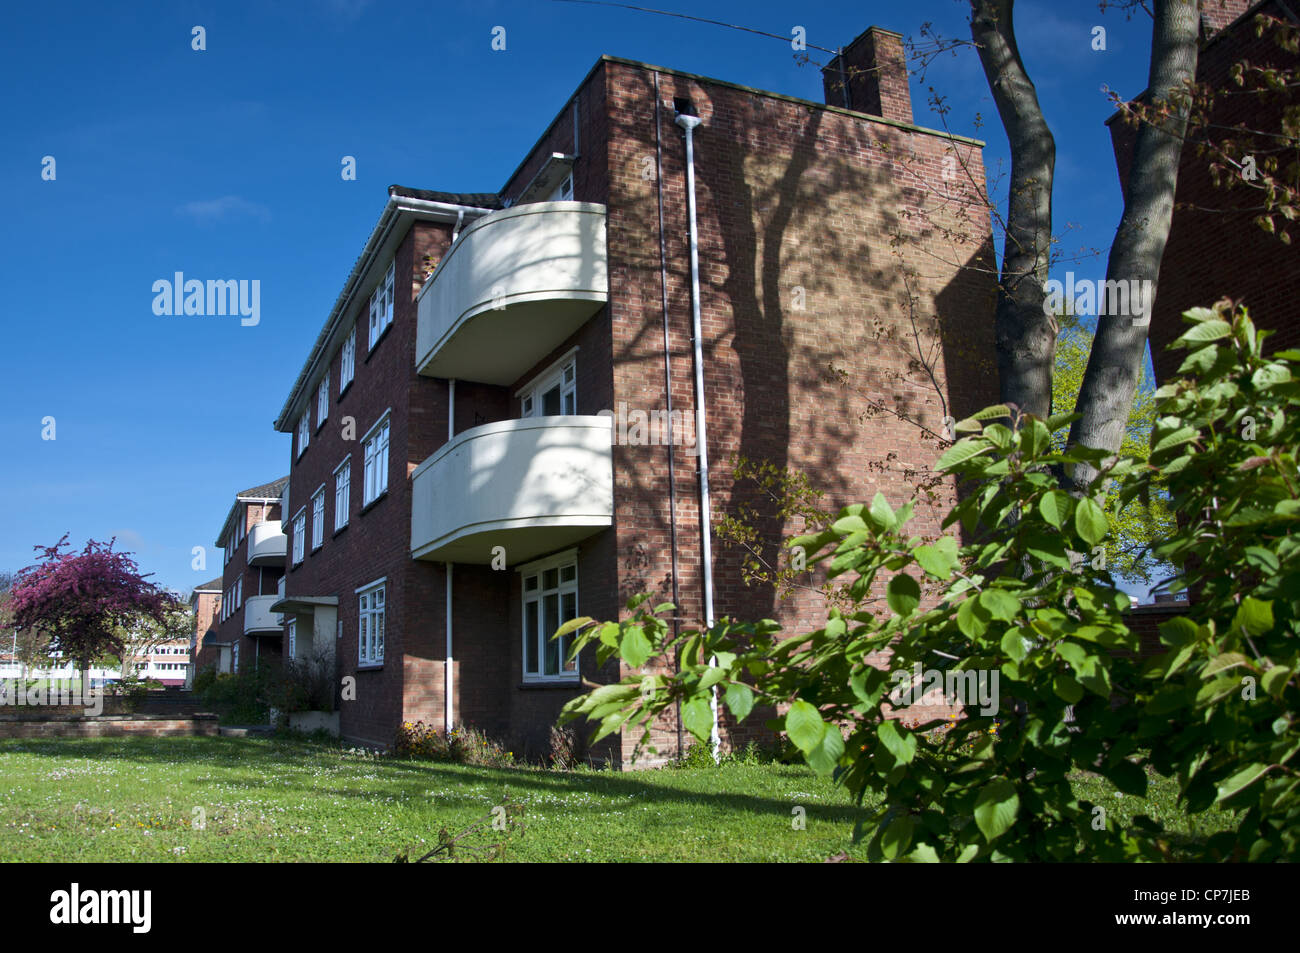 Norwich local authority council housing flats Stock Photo